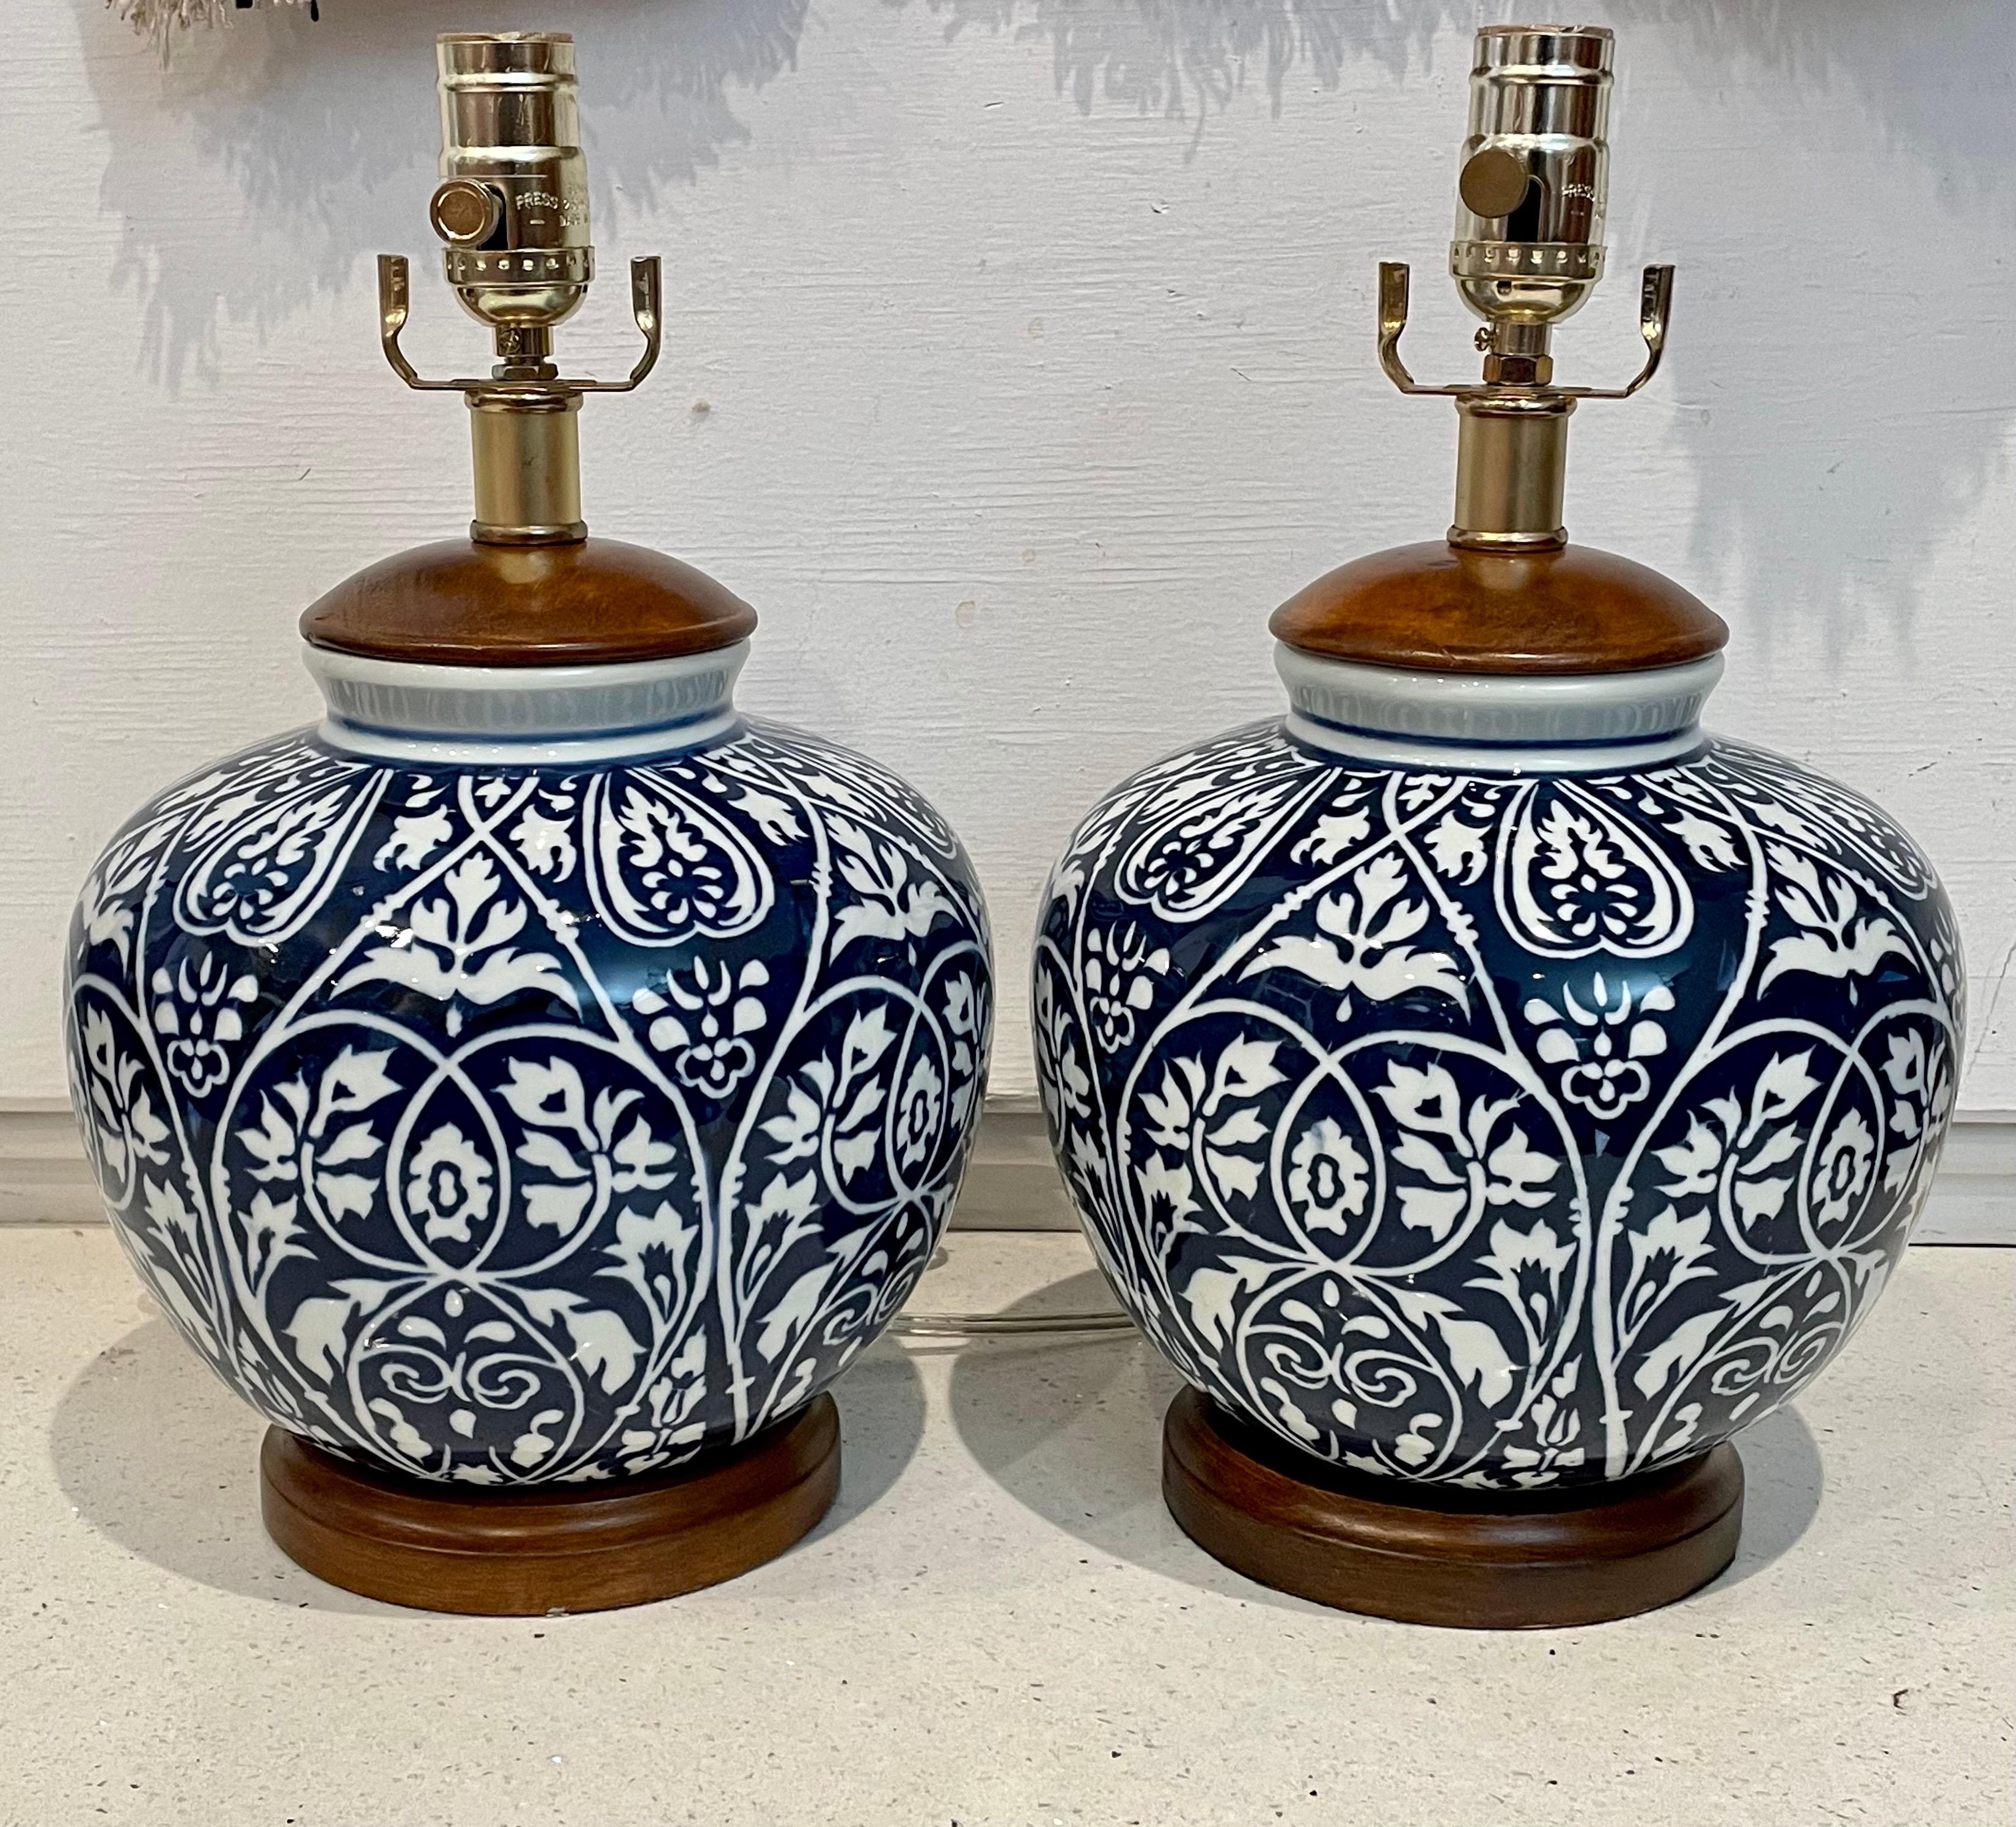 Beautiful pair of ceramic porcelain finish table lamps by Ralph Lauren, freshly rewired great condition like new, lampshades are not included, each lamp is 14